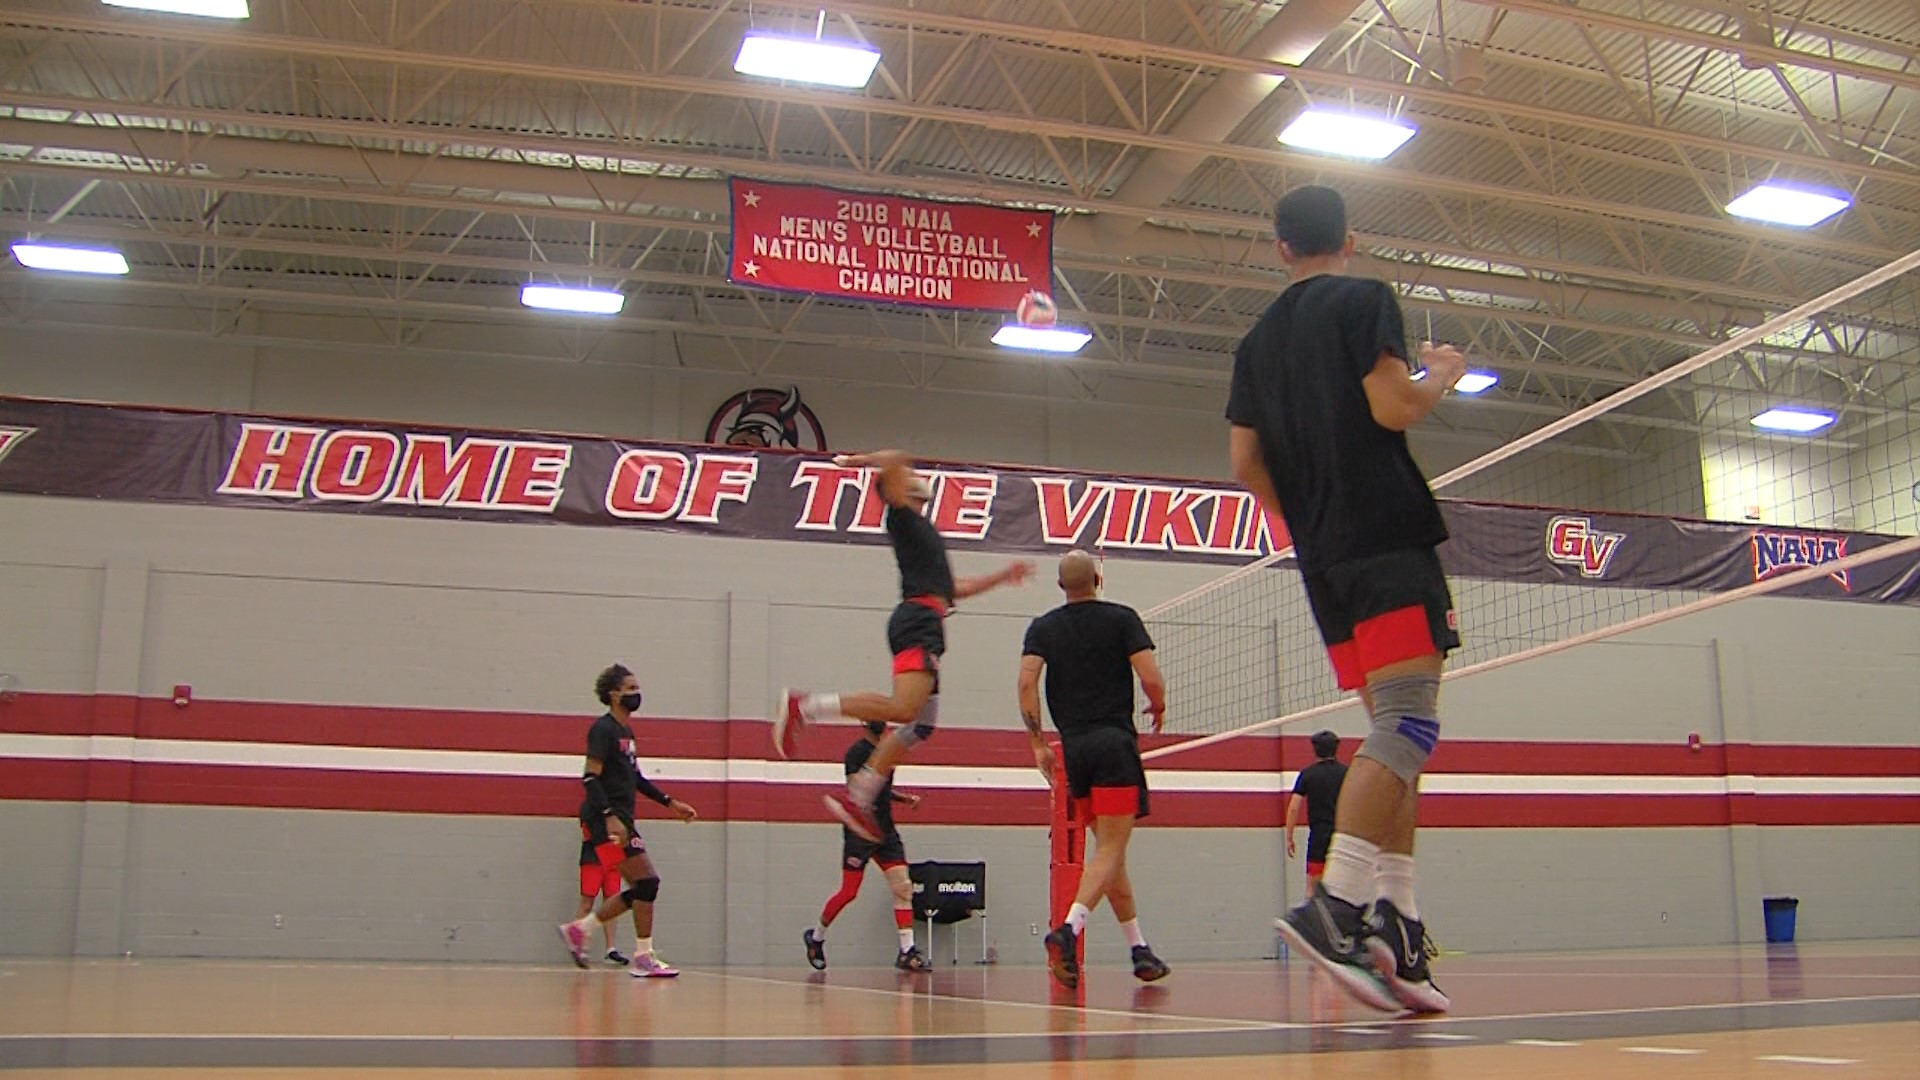 Grand View Vikings showing they are a hotbed for mens volleyball as they prepare for NAIA National Championship weareiowa